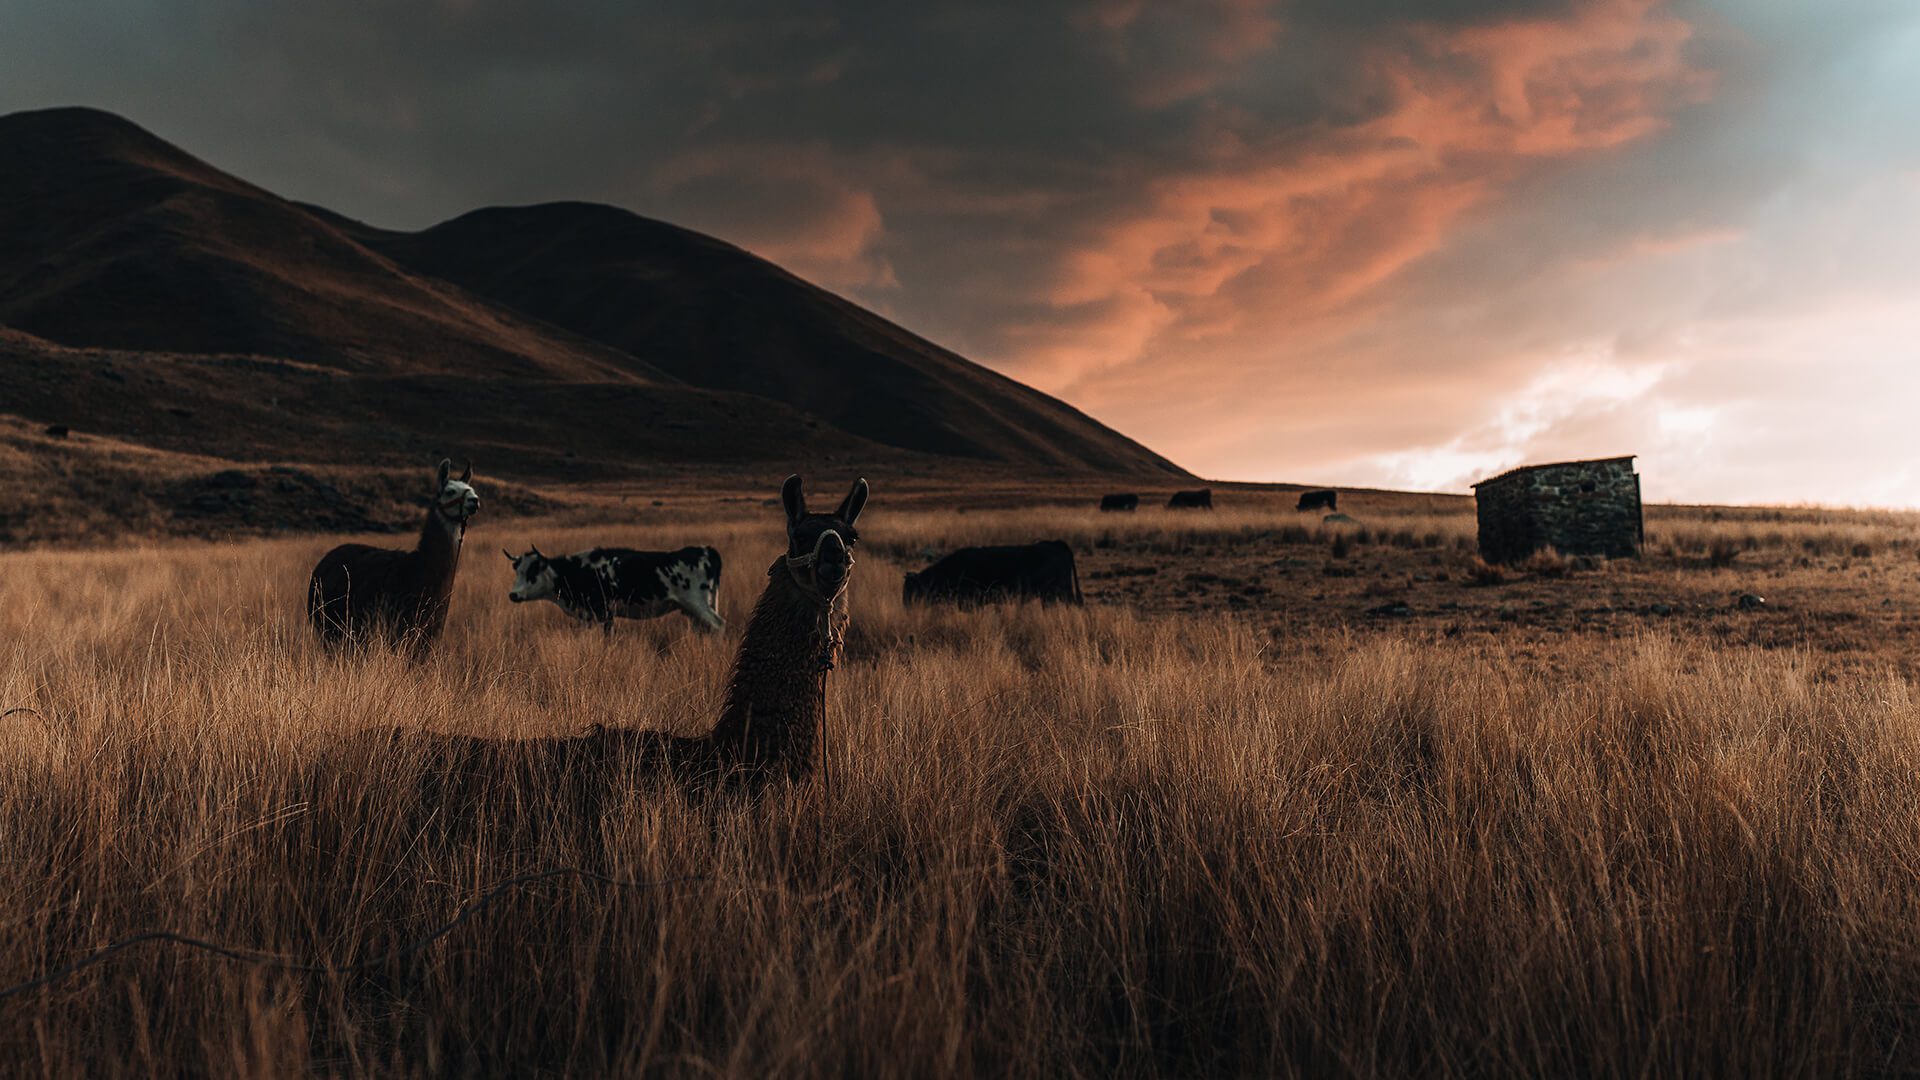 Llamas and cows in an Andean grassland at dusk | Llama Trek Olleros to Chavin with RESPONSible Travel Peru | Photo by Bjorn Snelders